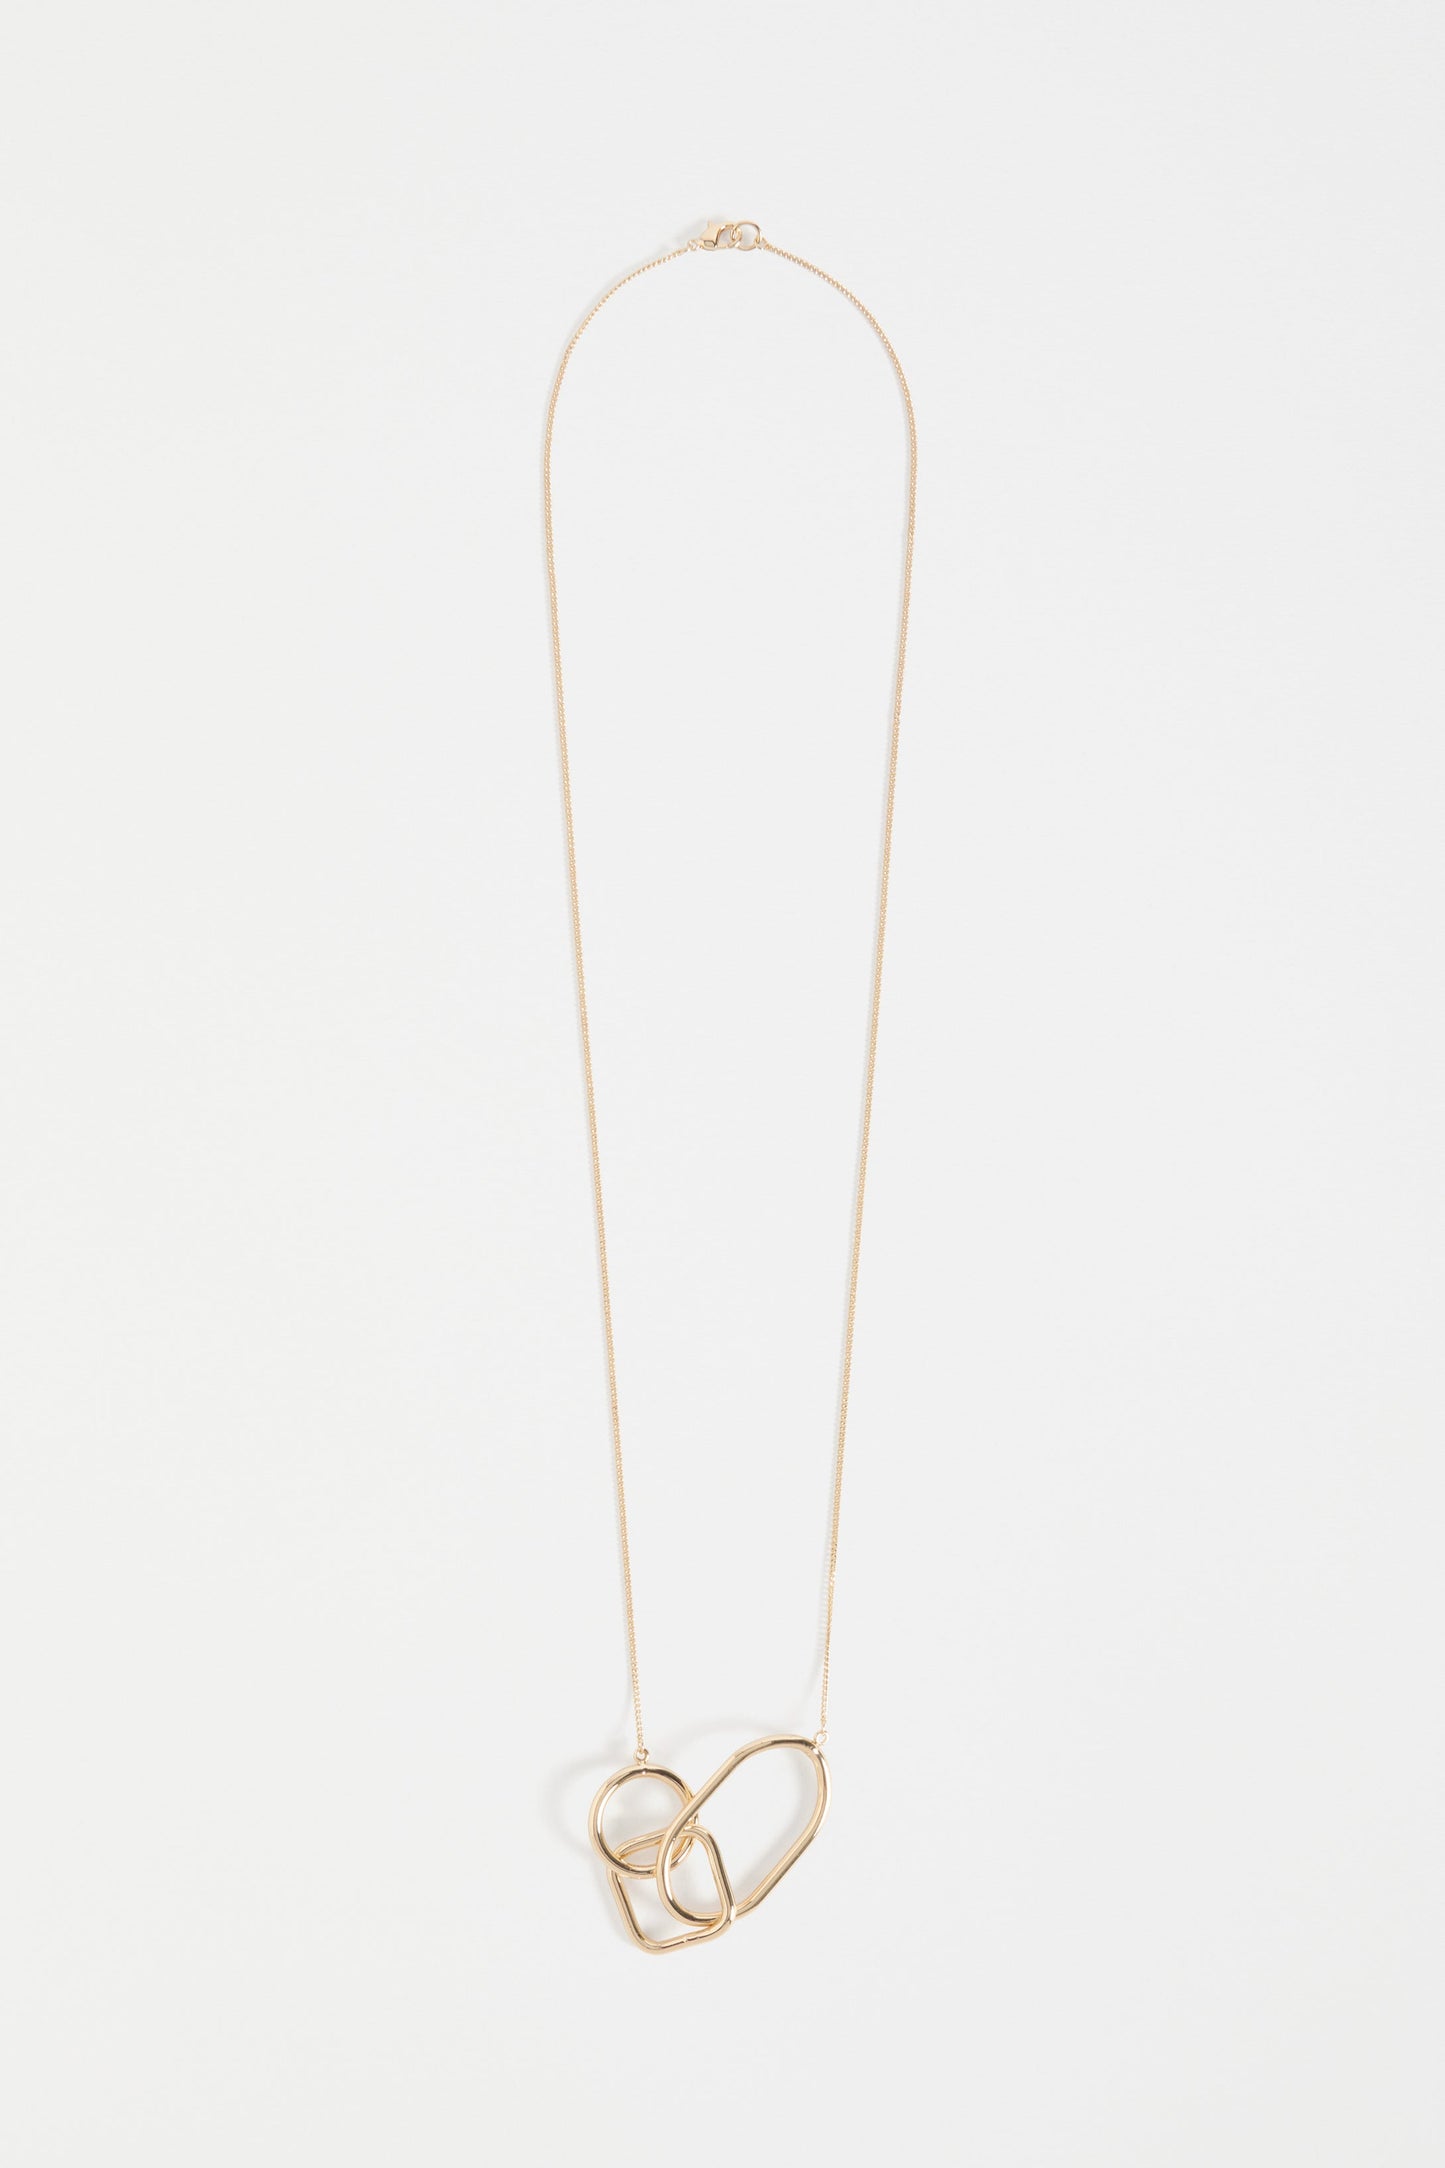 Rei Simple Long Gold Chain and Loop Pendant Necklace | GOLD